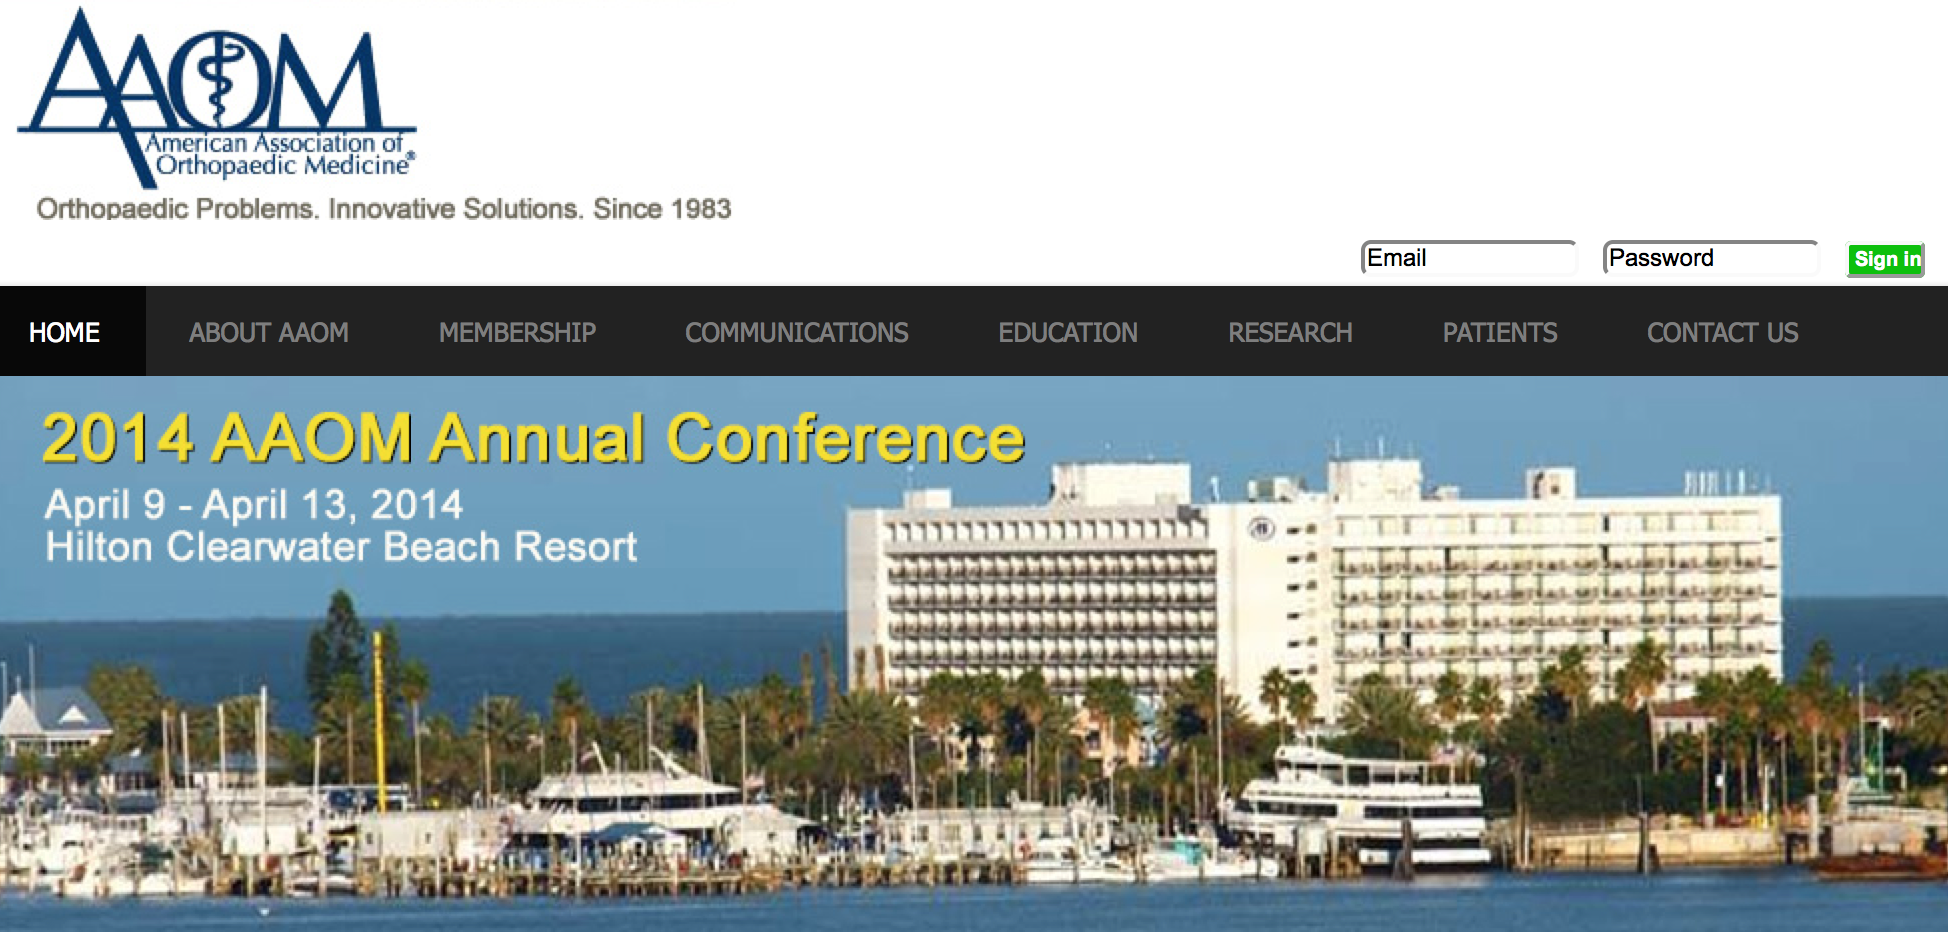 AAOM 2014 Annual Conference, April 9-12, 2014 at the Hilton Clearwater Beach Resort in Clearwater, Florida.